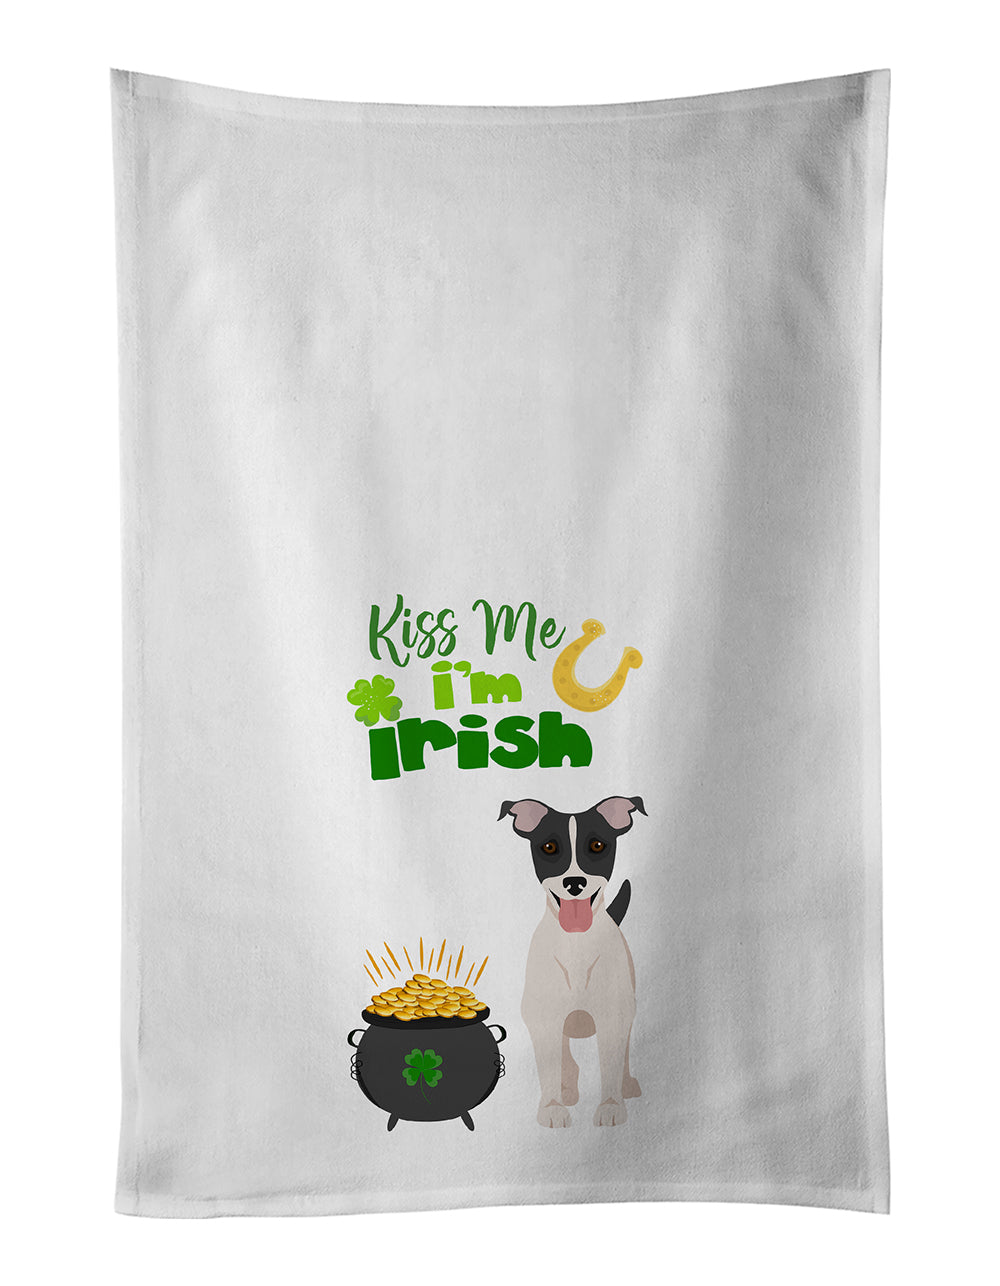 Buy this Black White Smooth Jack Russell Terrier St. Patrick's Day White Kitchen Towel Set of 2 Dish Towels